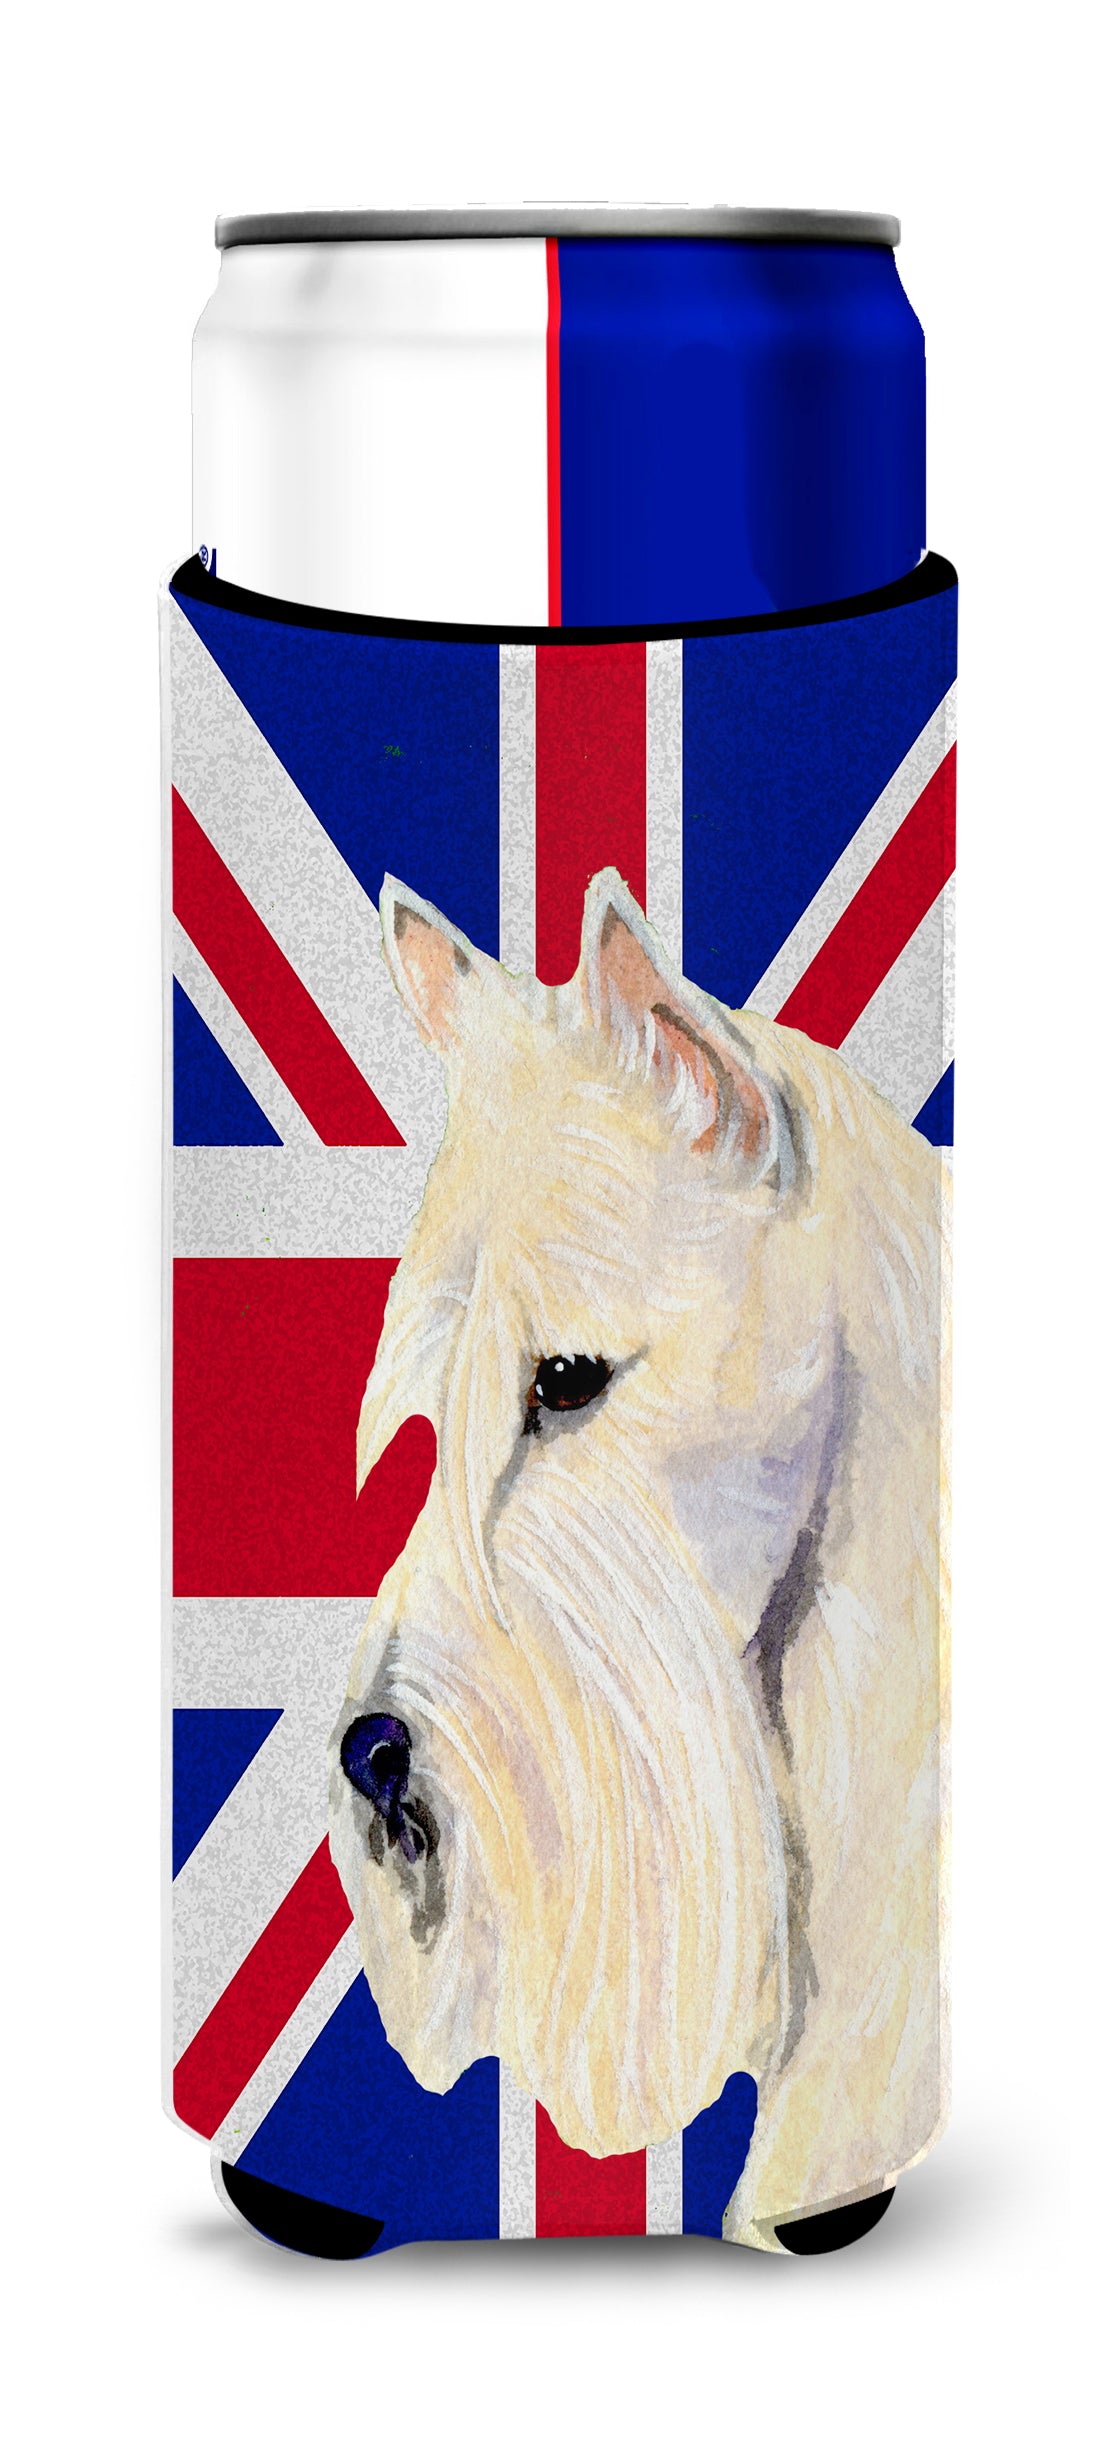 Scottish Terrier Wheaten with English Union Jack British Flag Ultra Beverage Insulators for slim cans SS4972MUK.